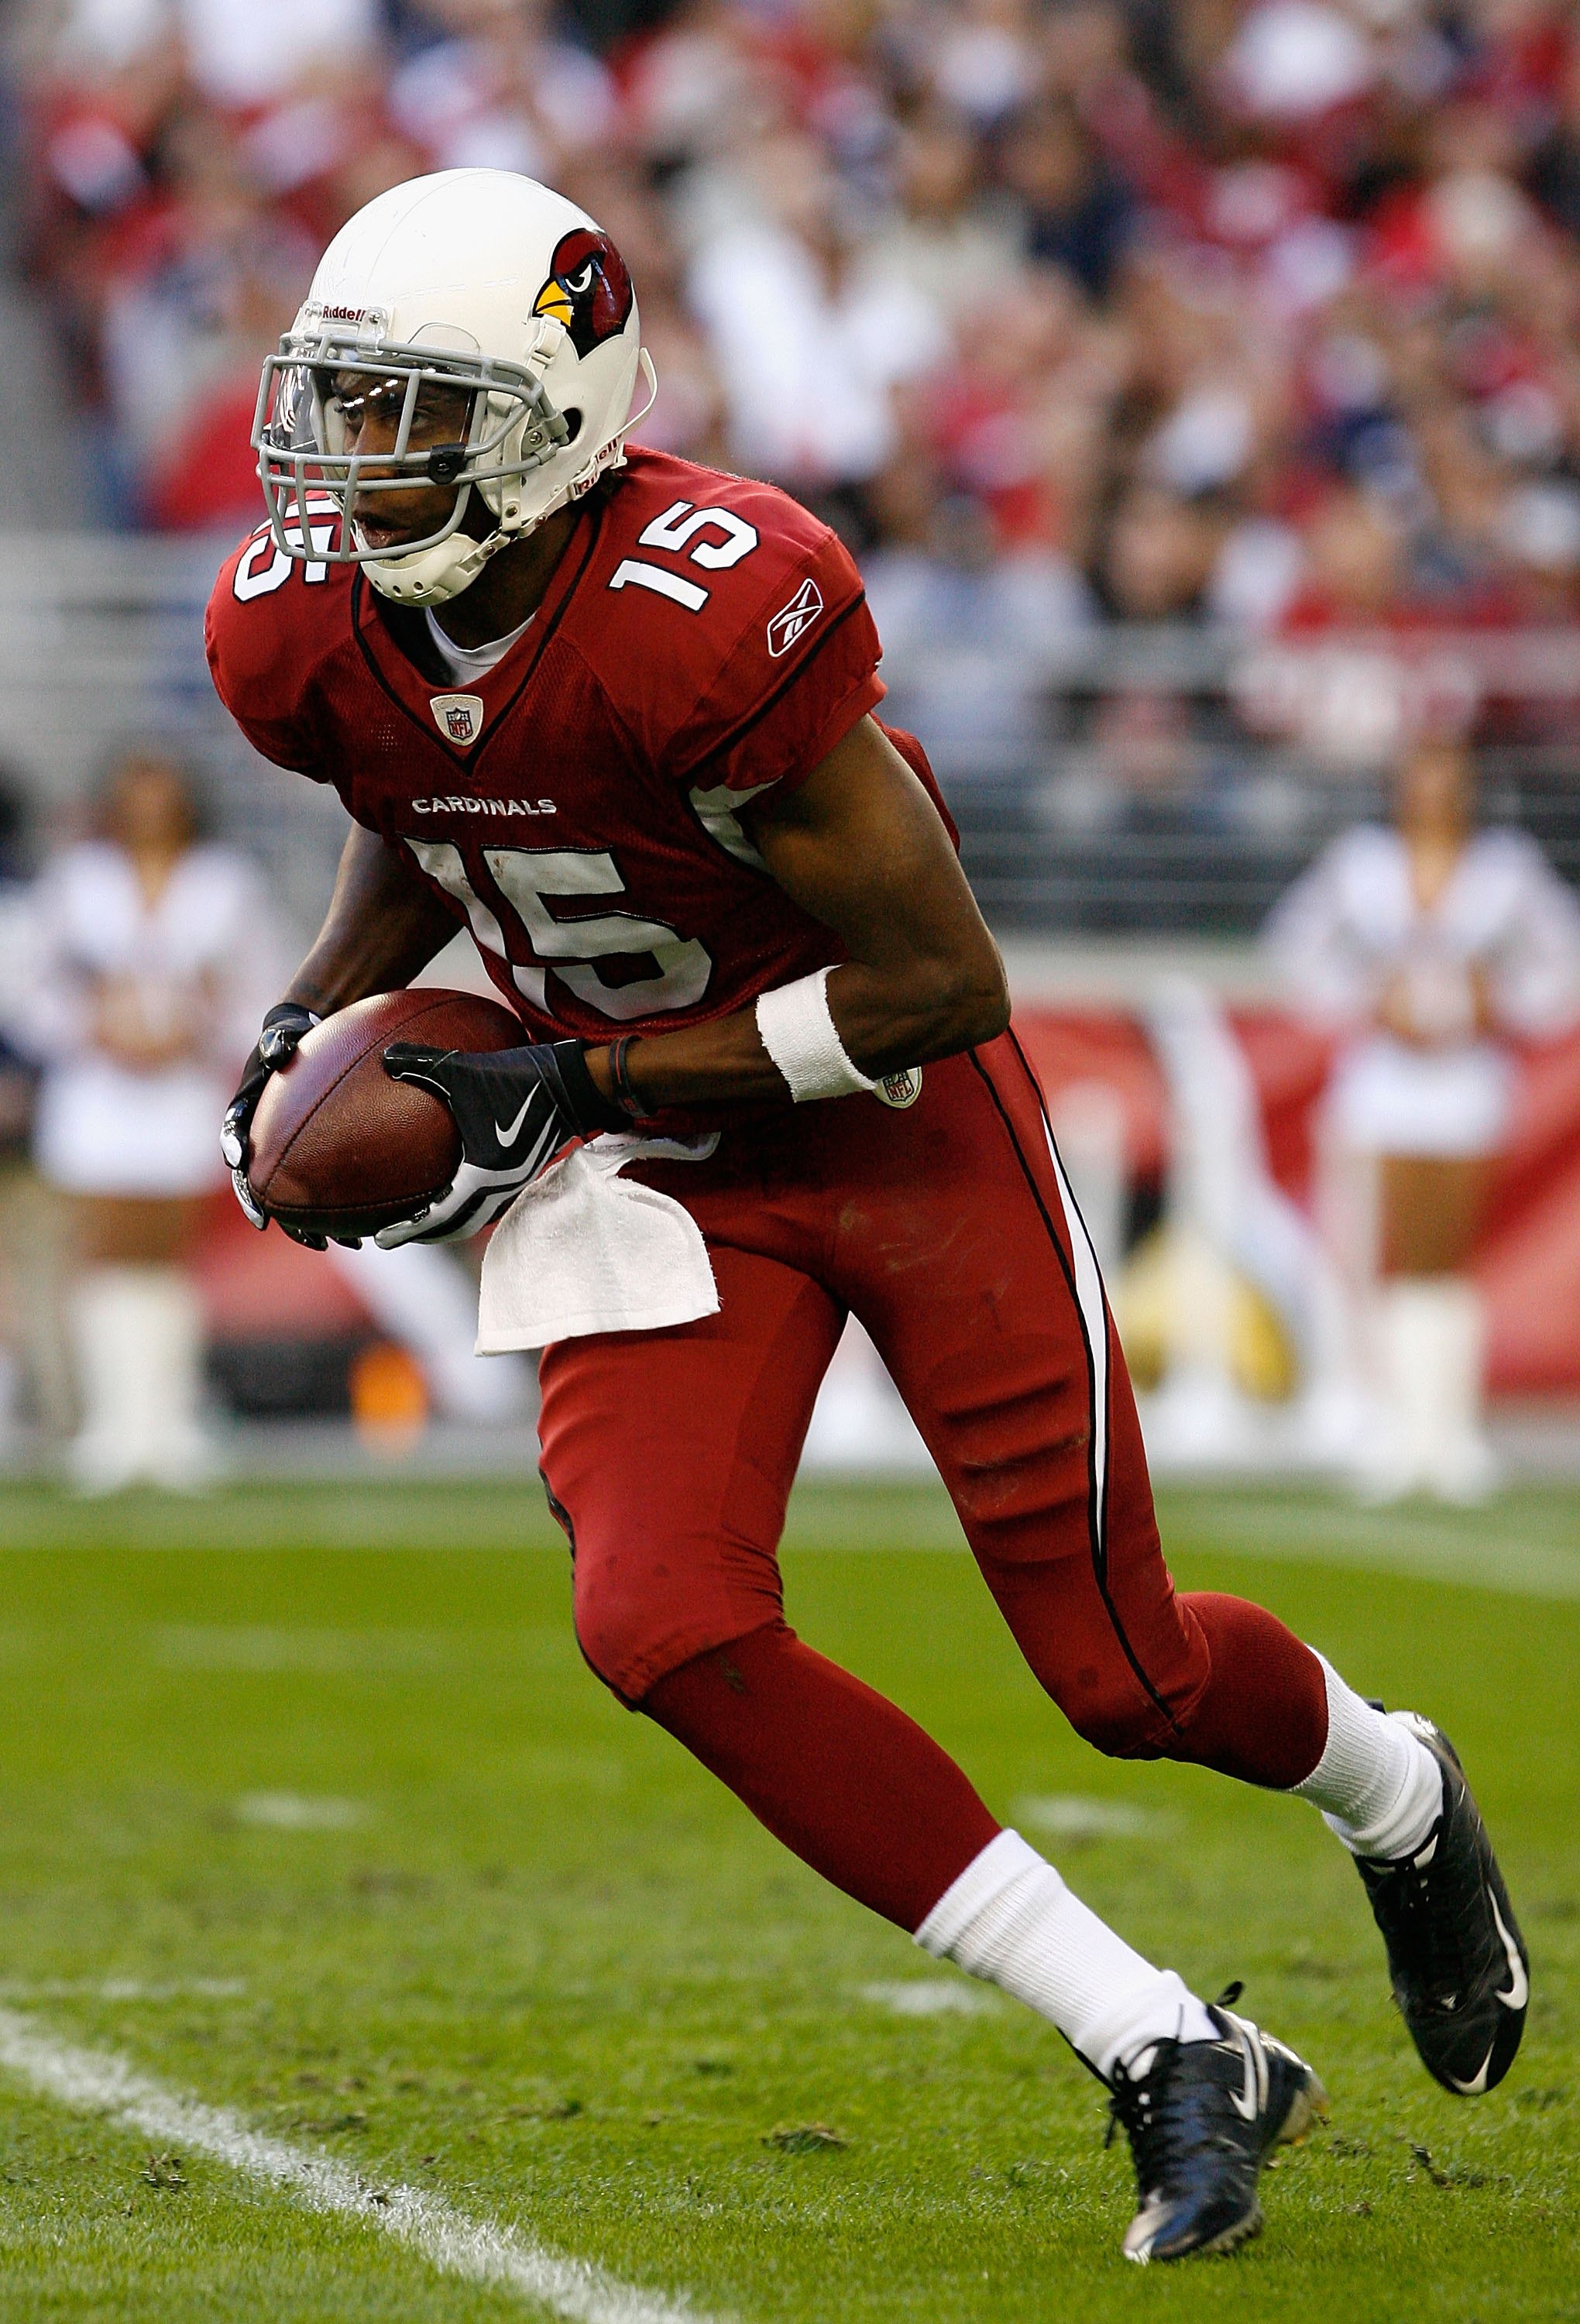 GLENDALE, AZ - DECEMBER 27:  Wide receiver Steve Breaston #15 of the Arizona Cardinals runs with the football during the NFL game against the St. Louis Rams at the Universtity of Phoenix Stadium on December 27, 2009 in Glendale, Arizona. The Cardinals def